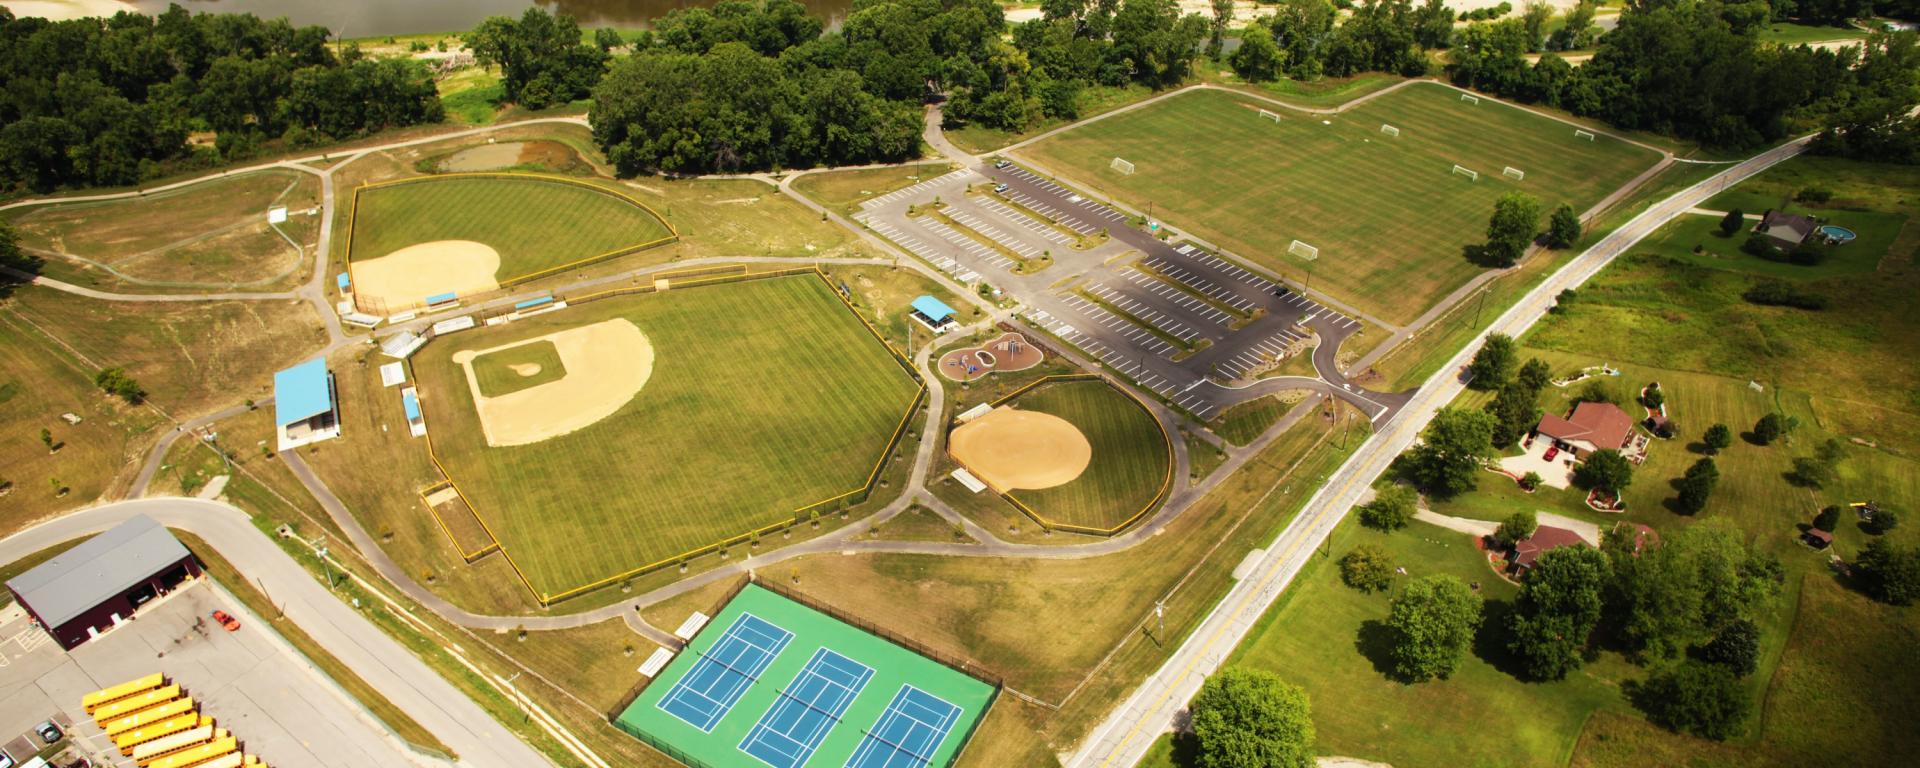 aerial of park and athletic fields